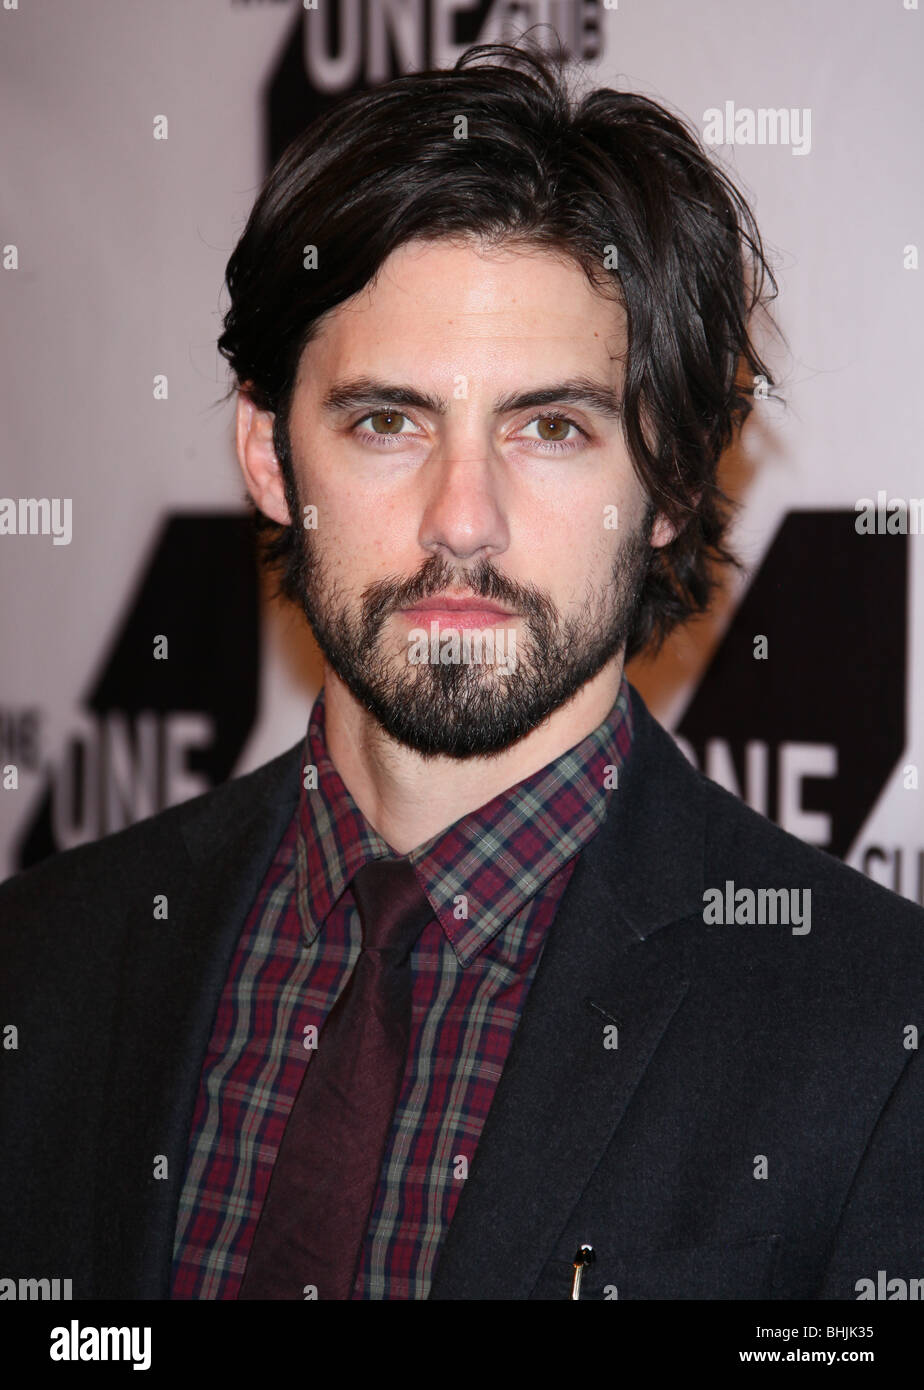 MILO VENTIMIGLIA ONE SHOW ENTERAINMENT THE BEST OF THE BEST IN ADVERTIAING AND ENTERTAINMENT HOLLYWOOD LOS ANGELES CA USA 17 Stock Photo